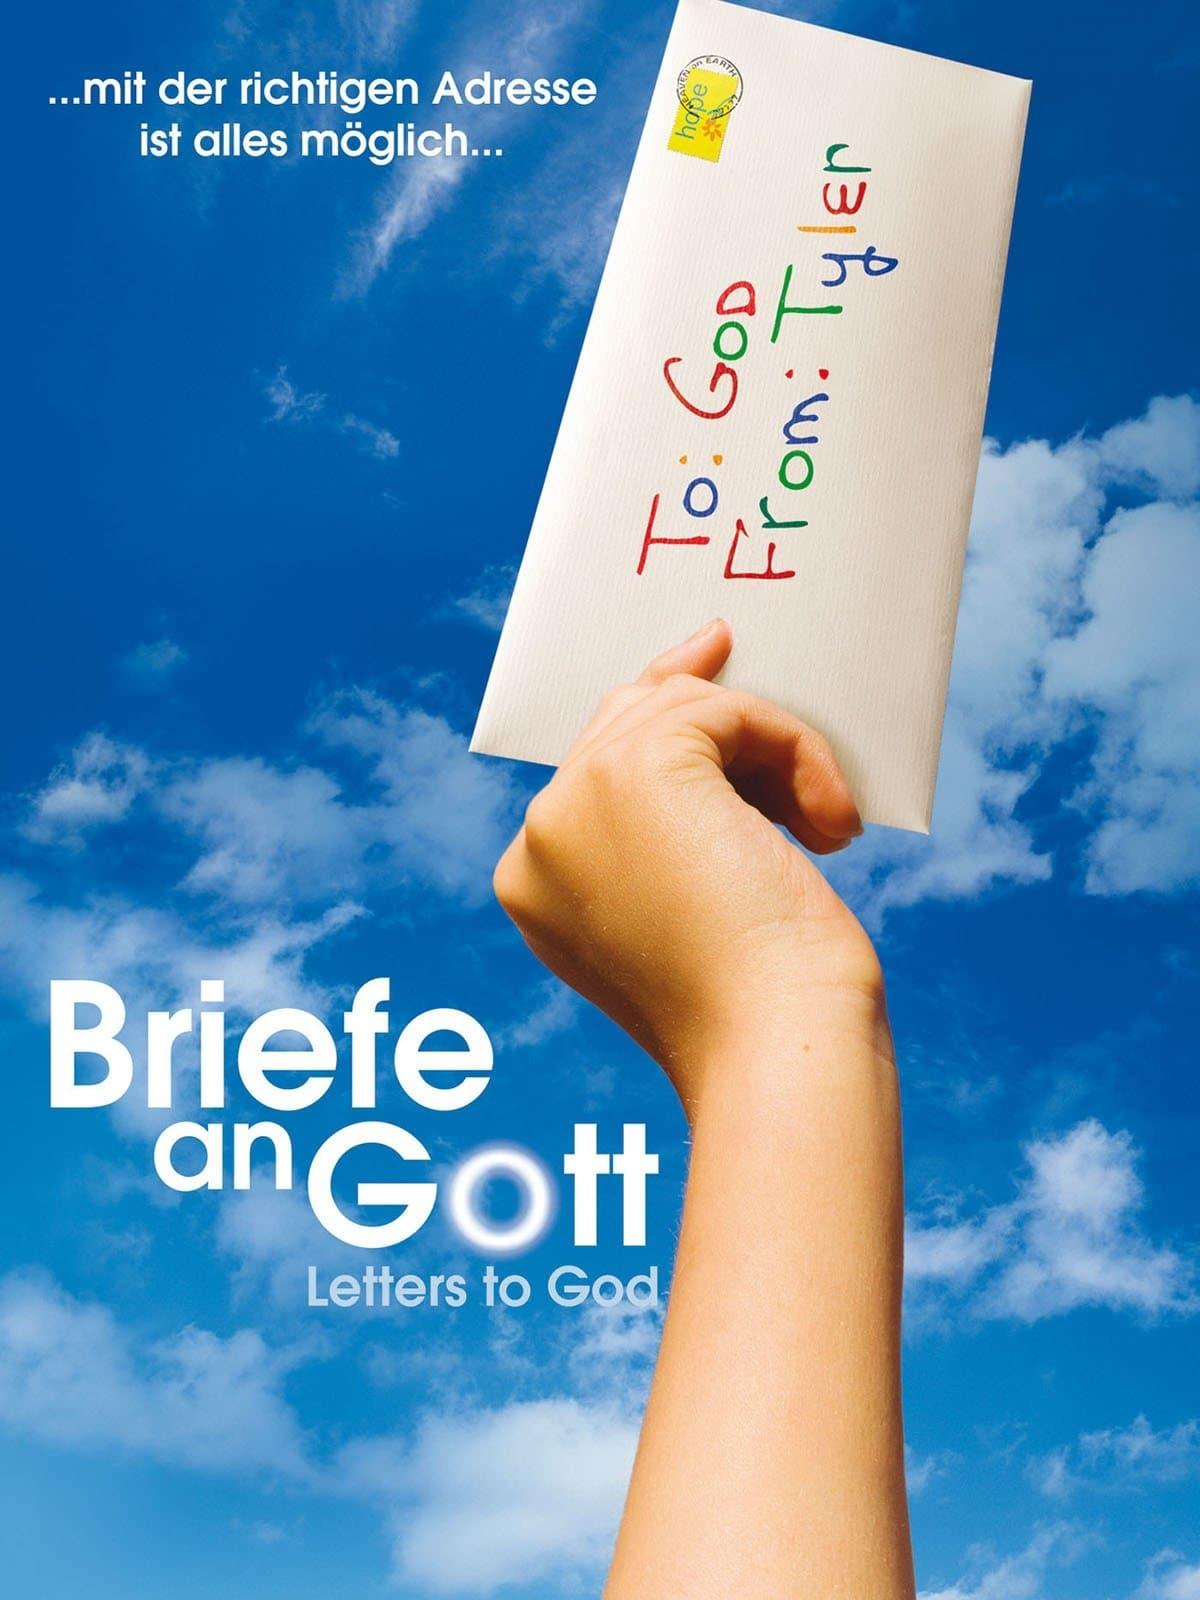 Briefe an Gott - Letters to God poster